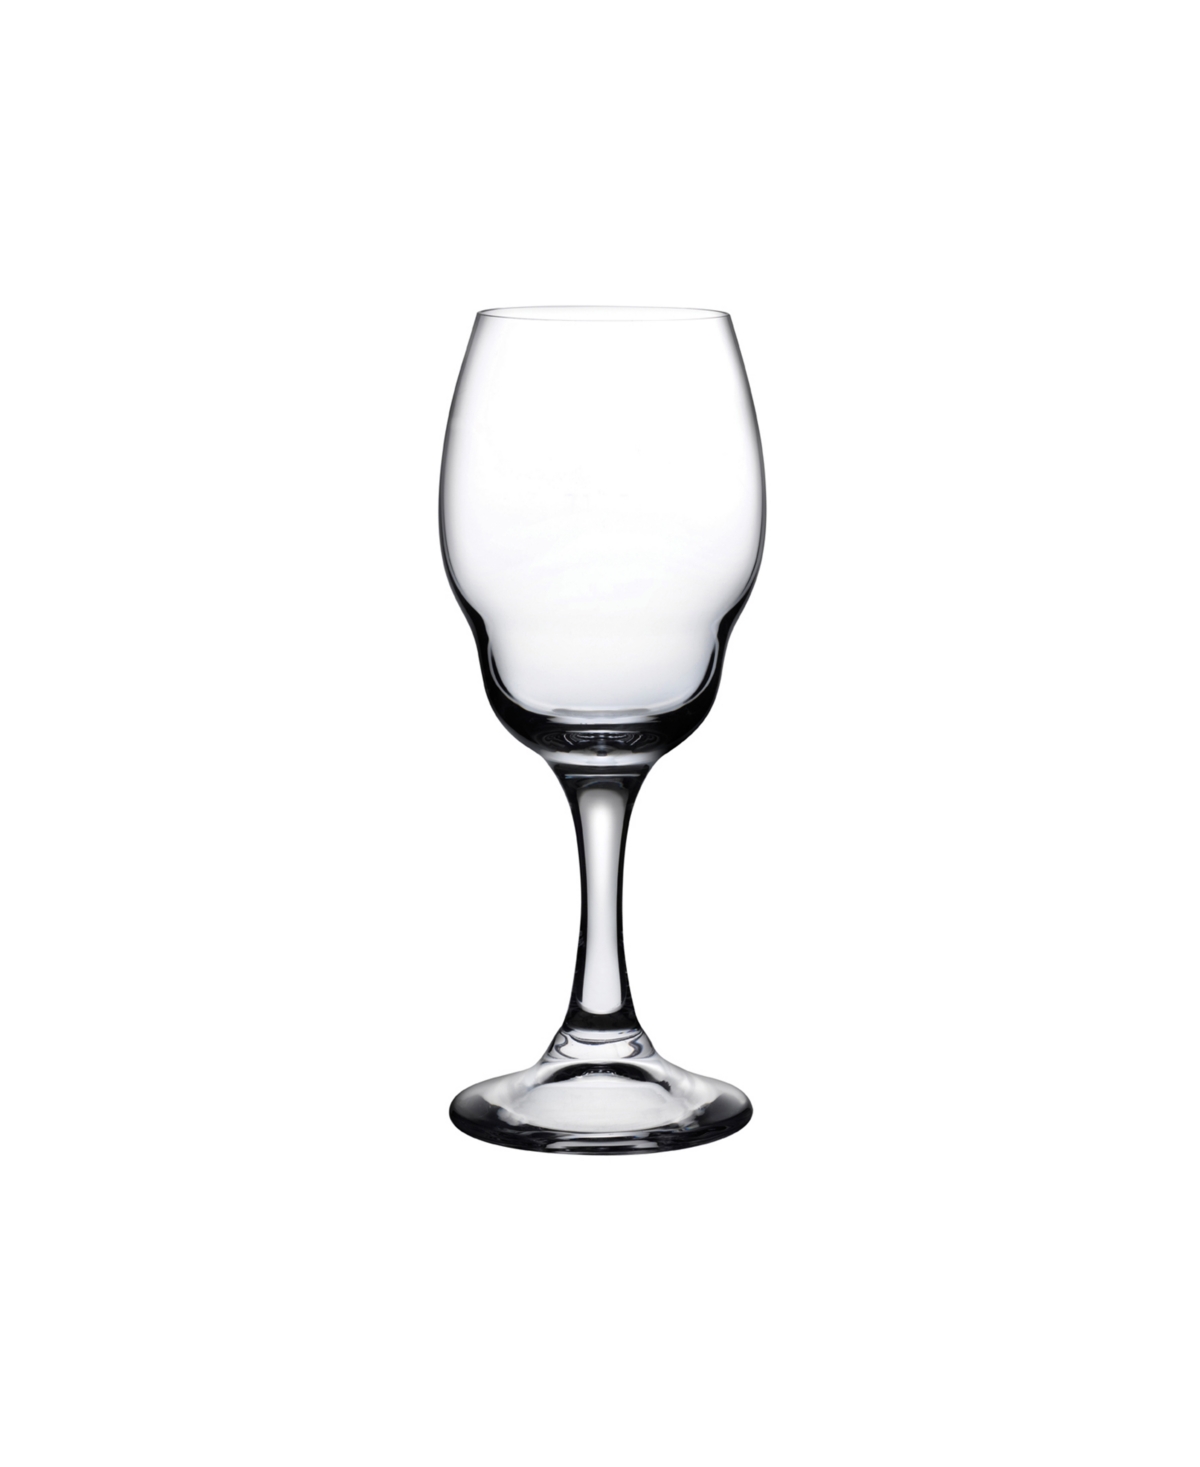 Nude Glass Heads Up White Wine Glass Set, 2 Piece In Clear